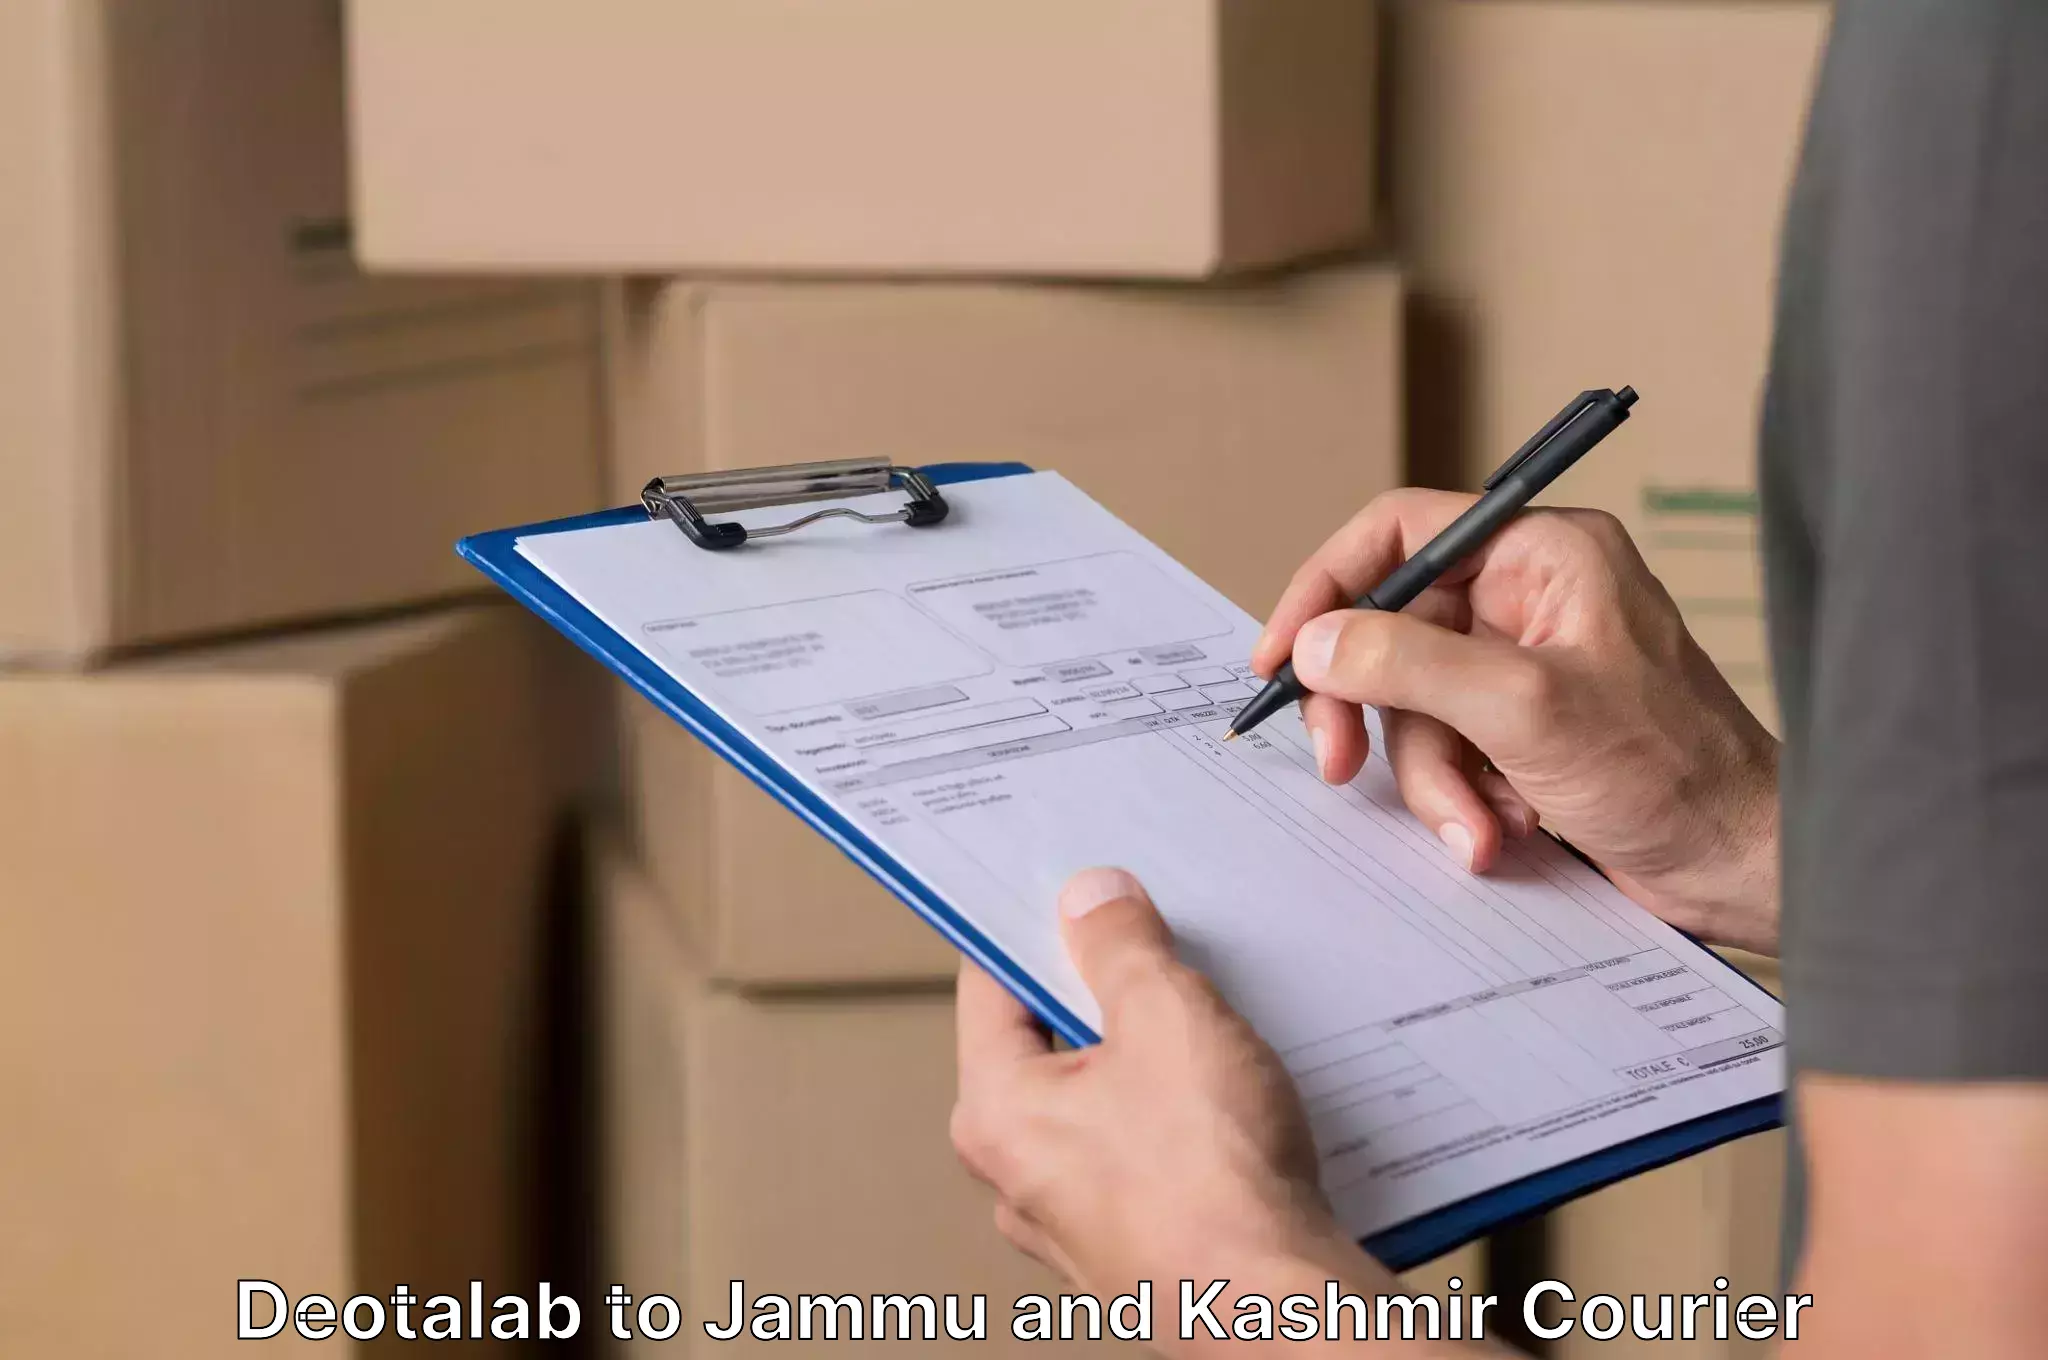 Furniture relocation services Deotalab to University of Jammu